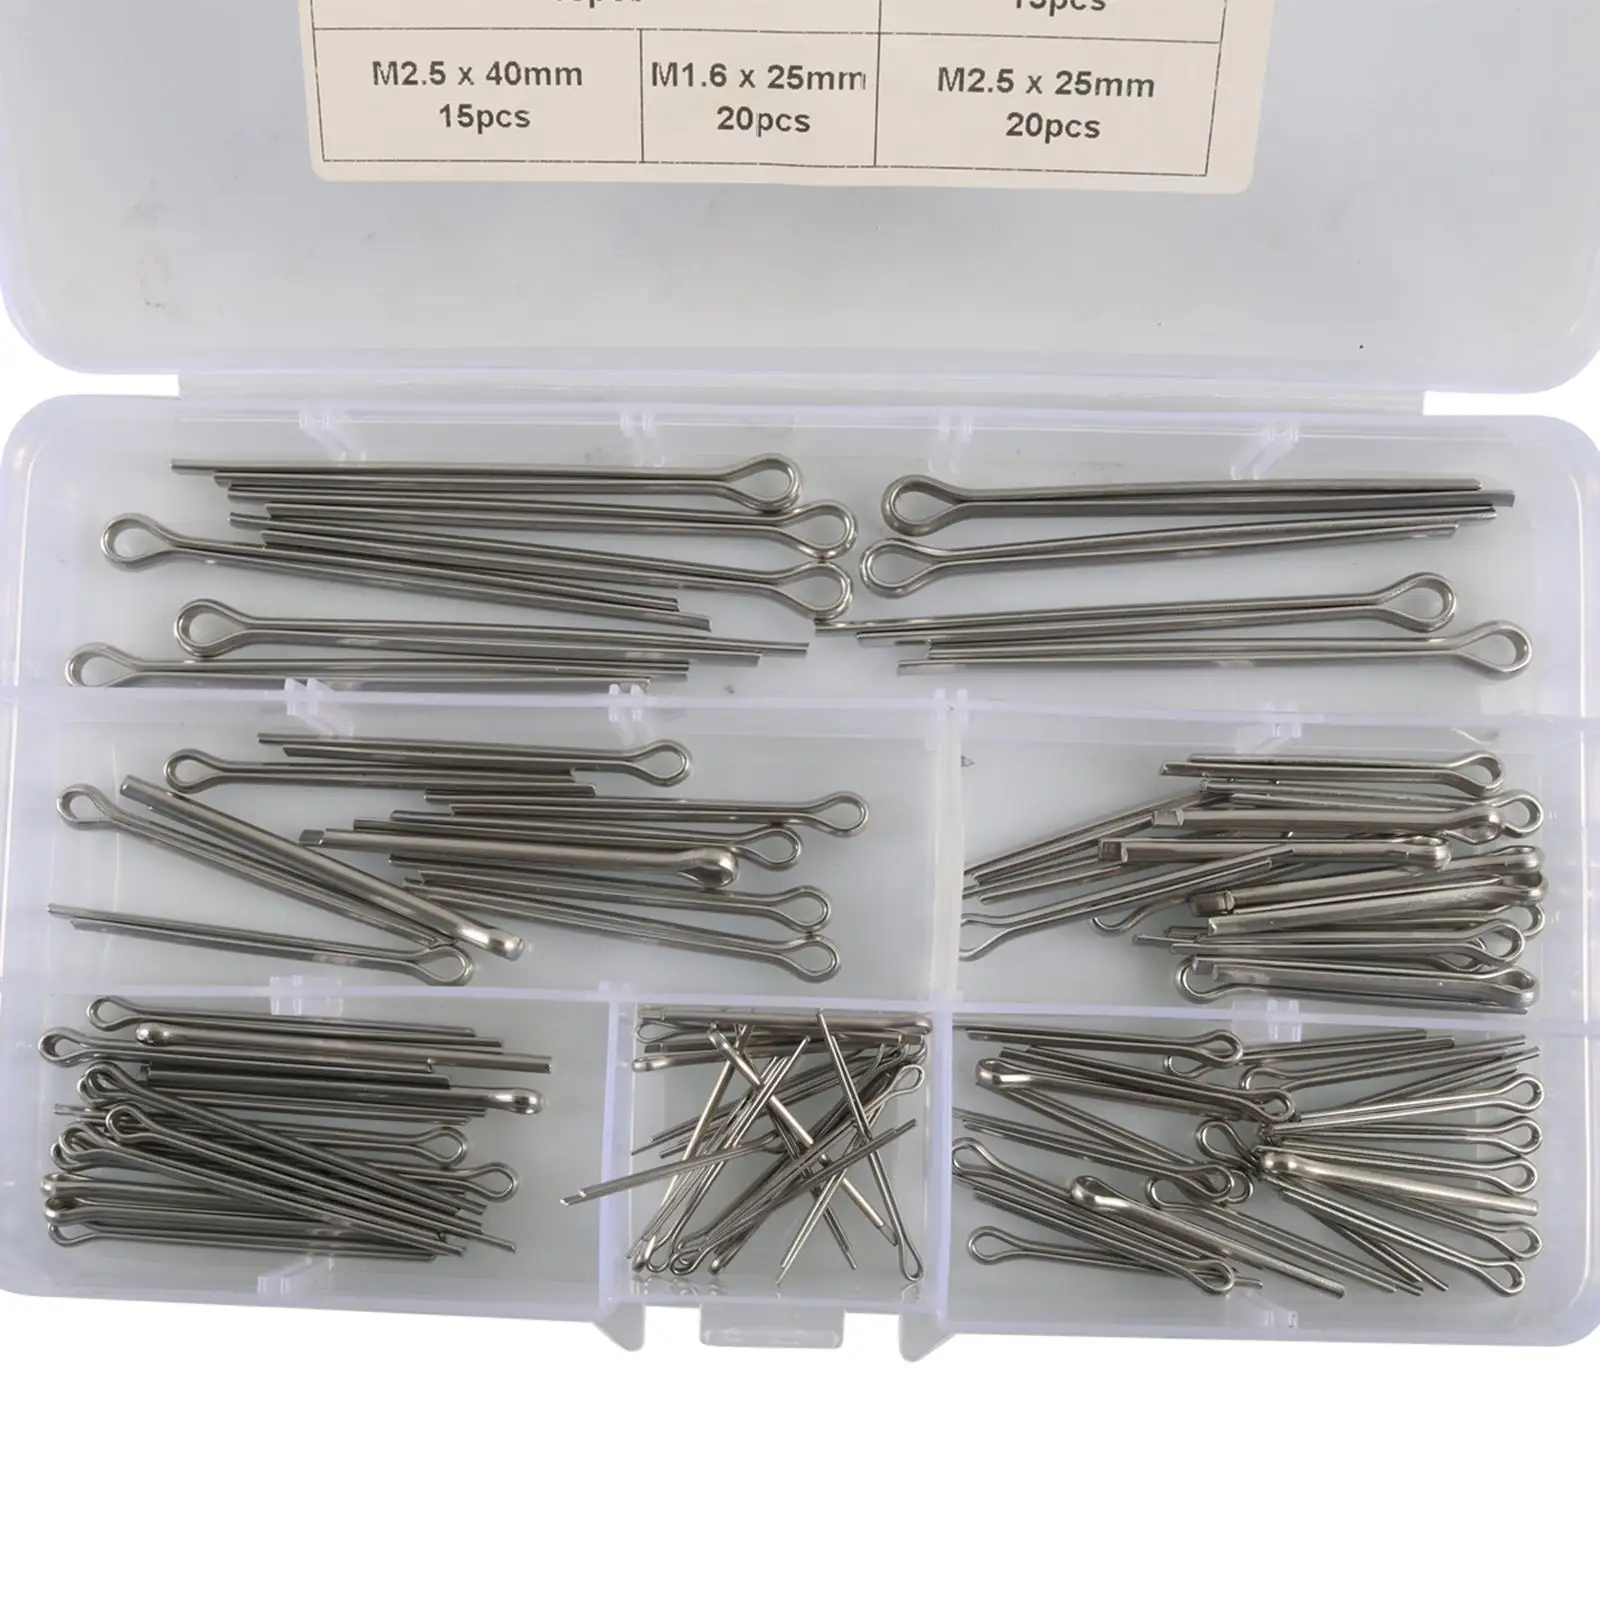 Cotter Pin Assortment  Pin Fastener Clip 6 Sizes Cotter  Fit for Power Equipment Car Garage Truck Automotive